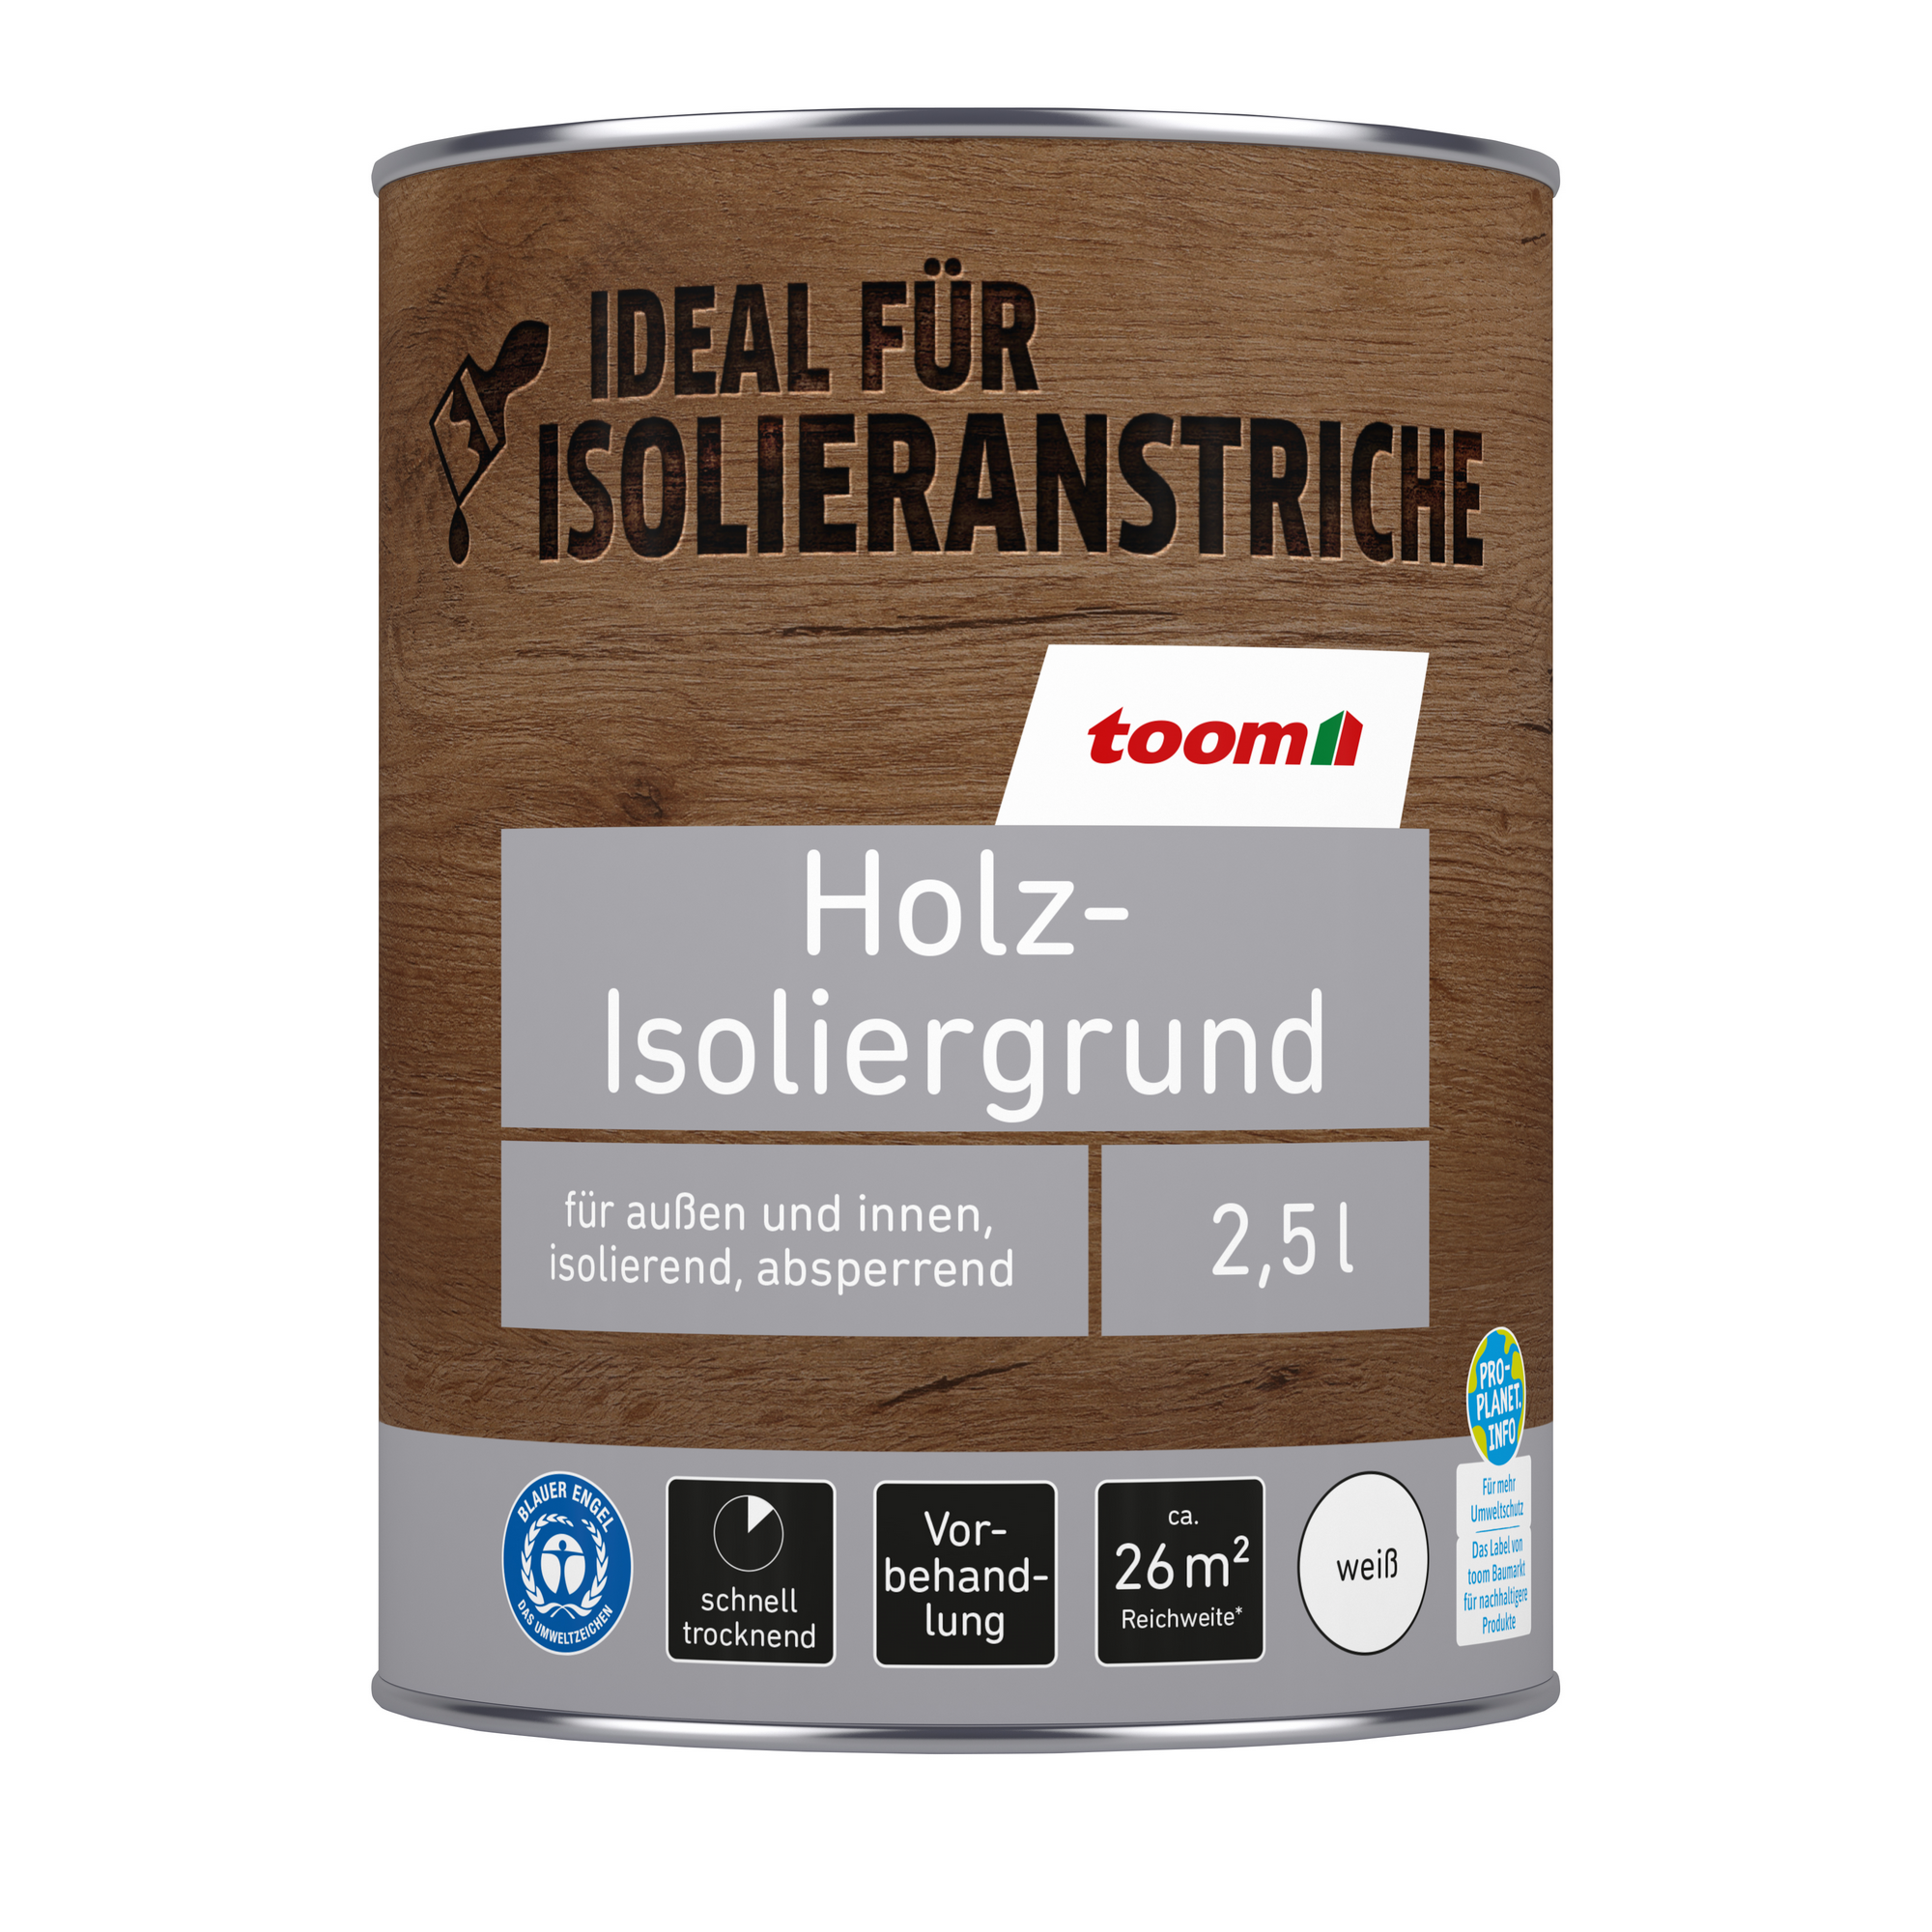 Holzisolierung weiß 2,5 l + product picture